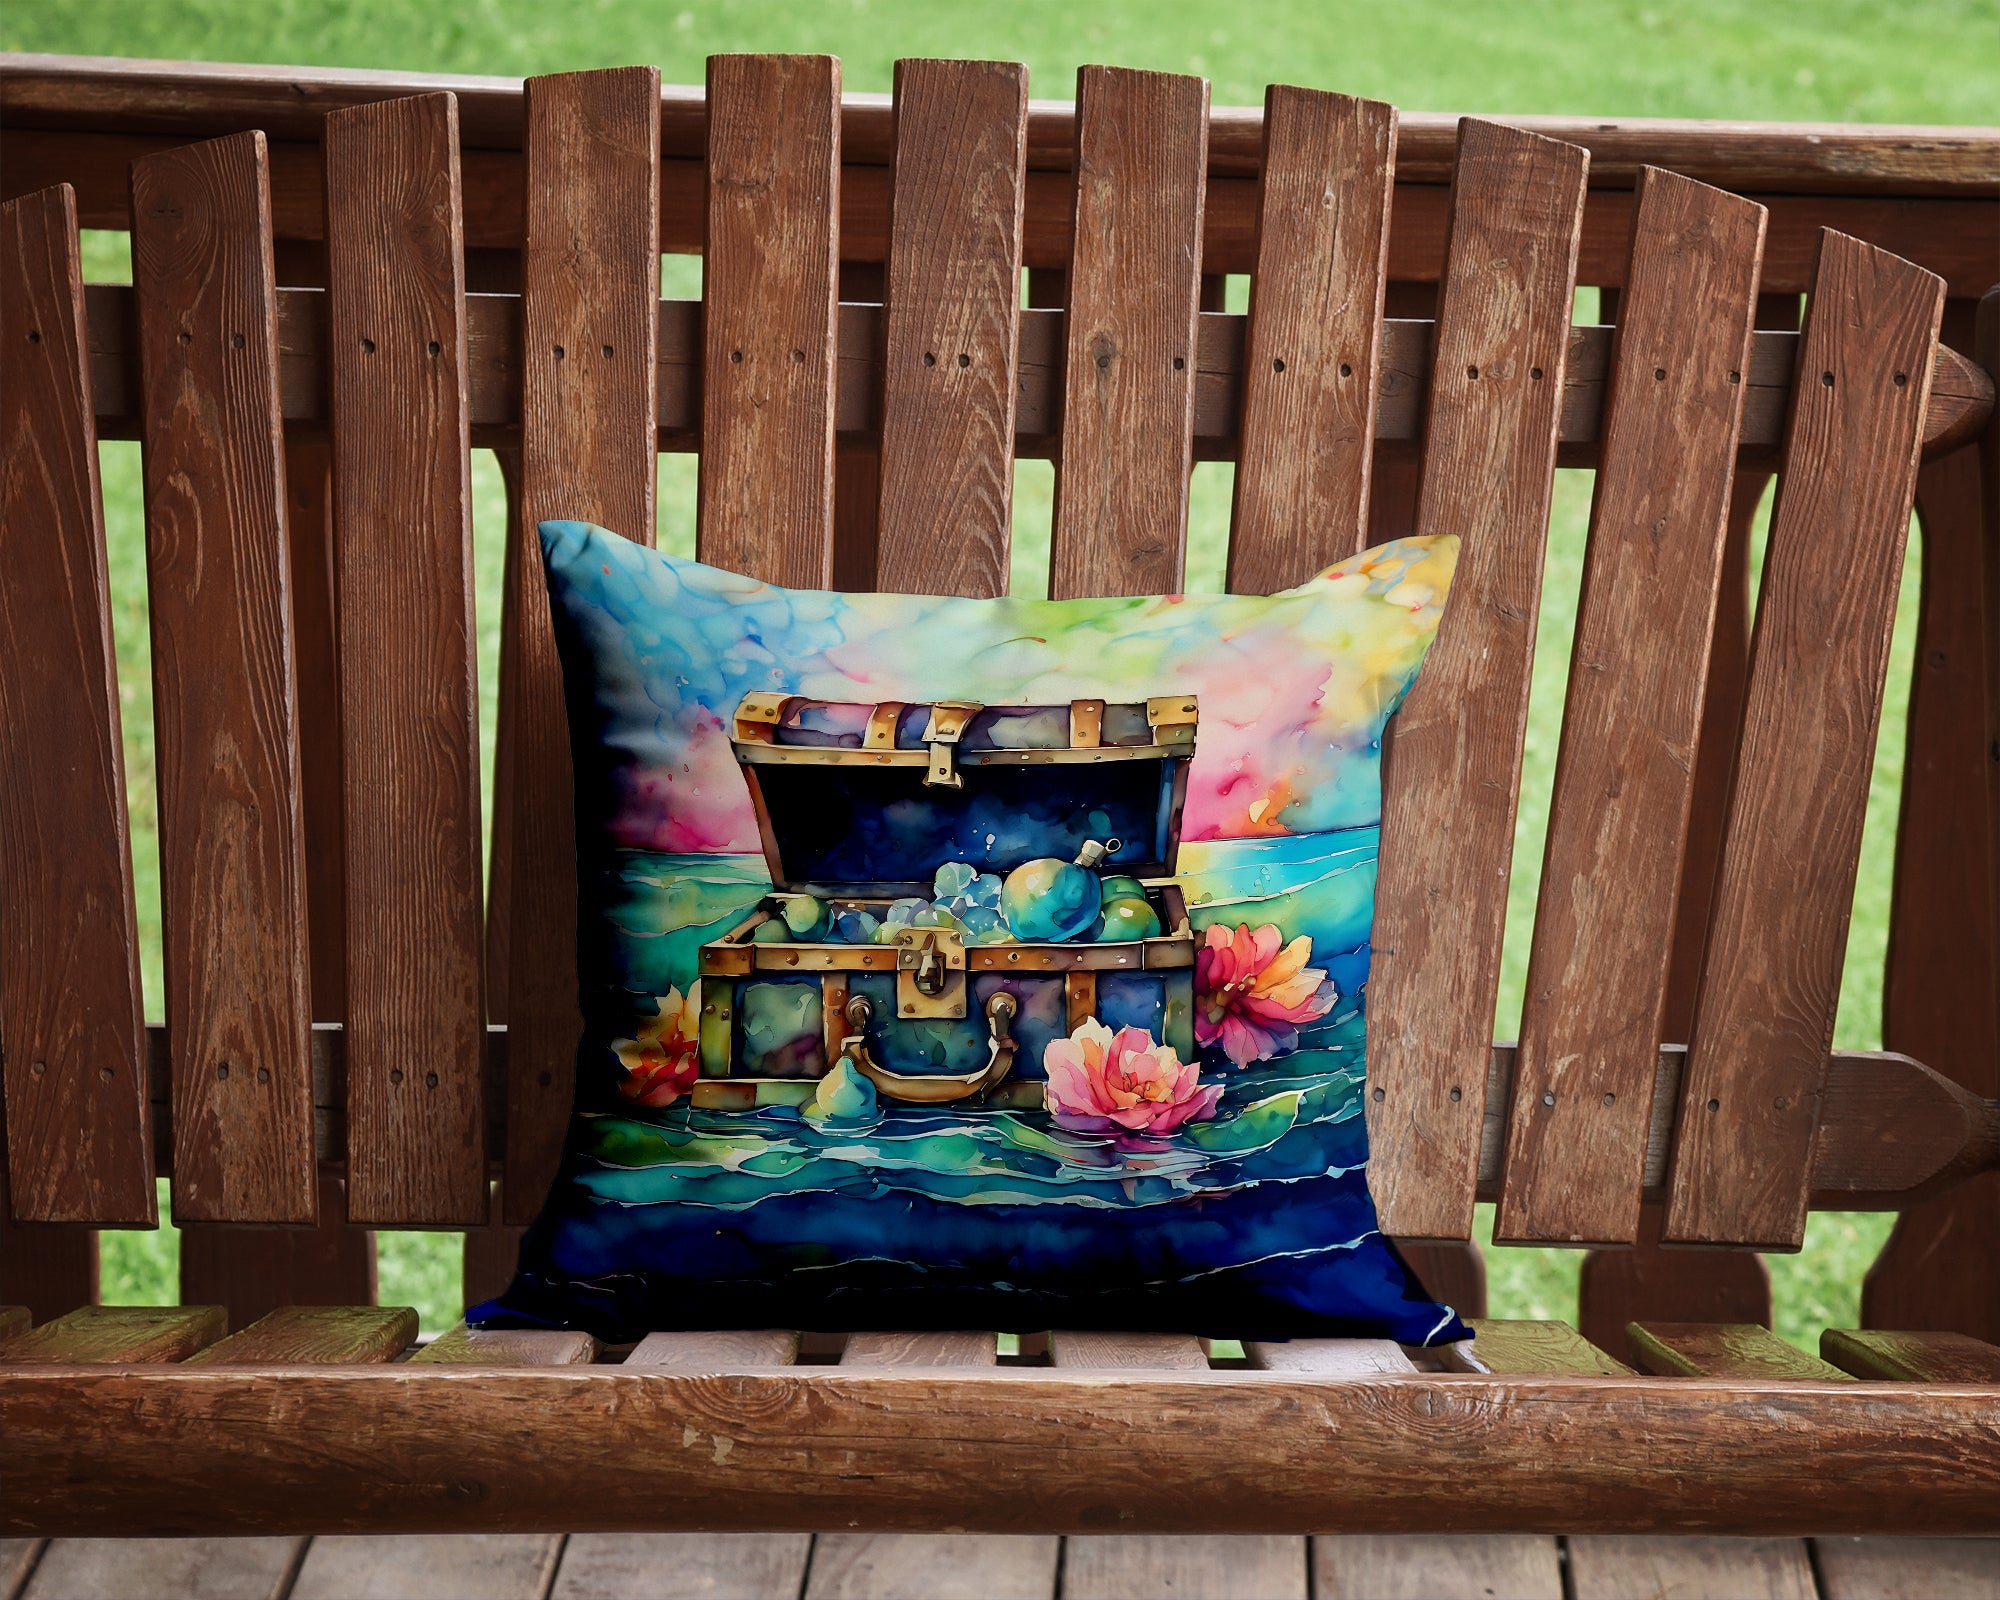 Buy this Treasure Chest Throw Pillow